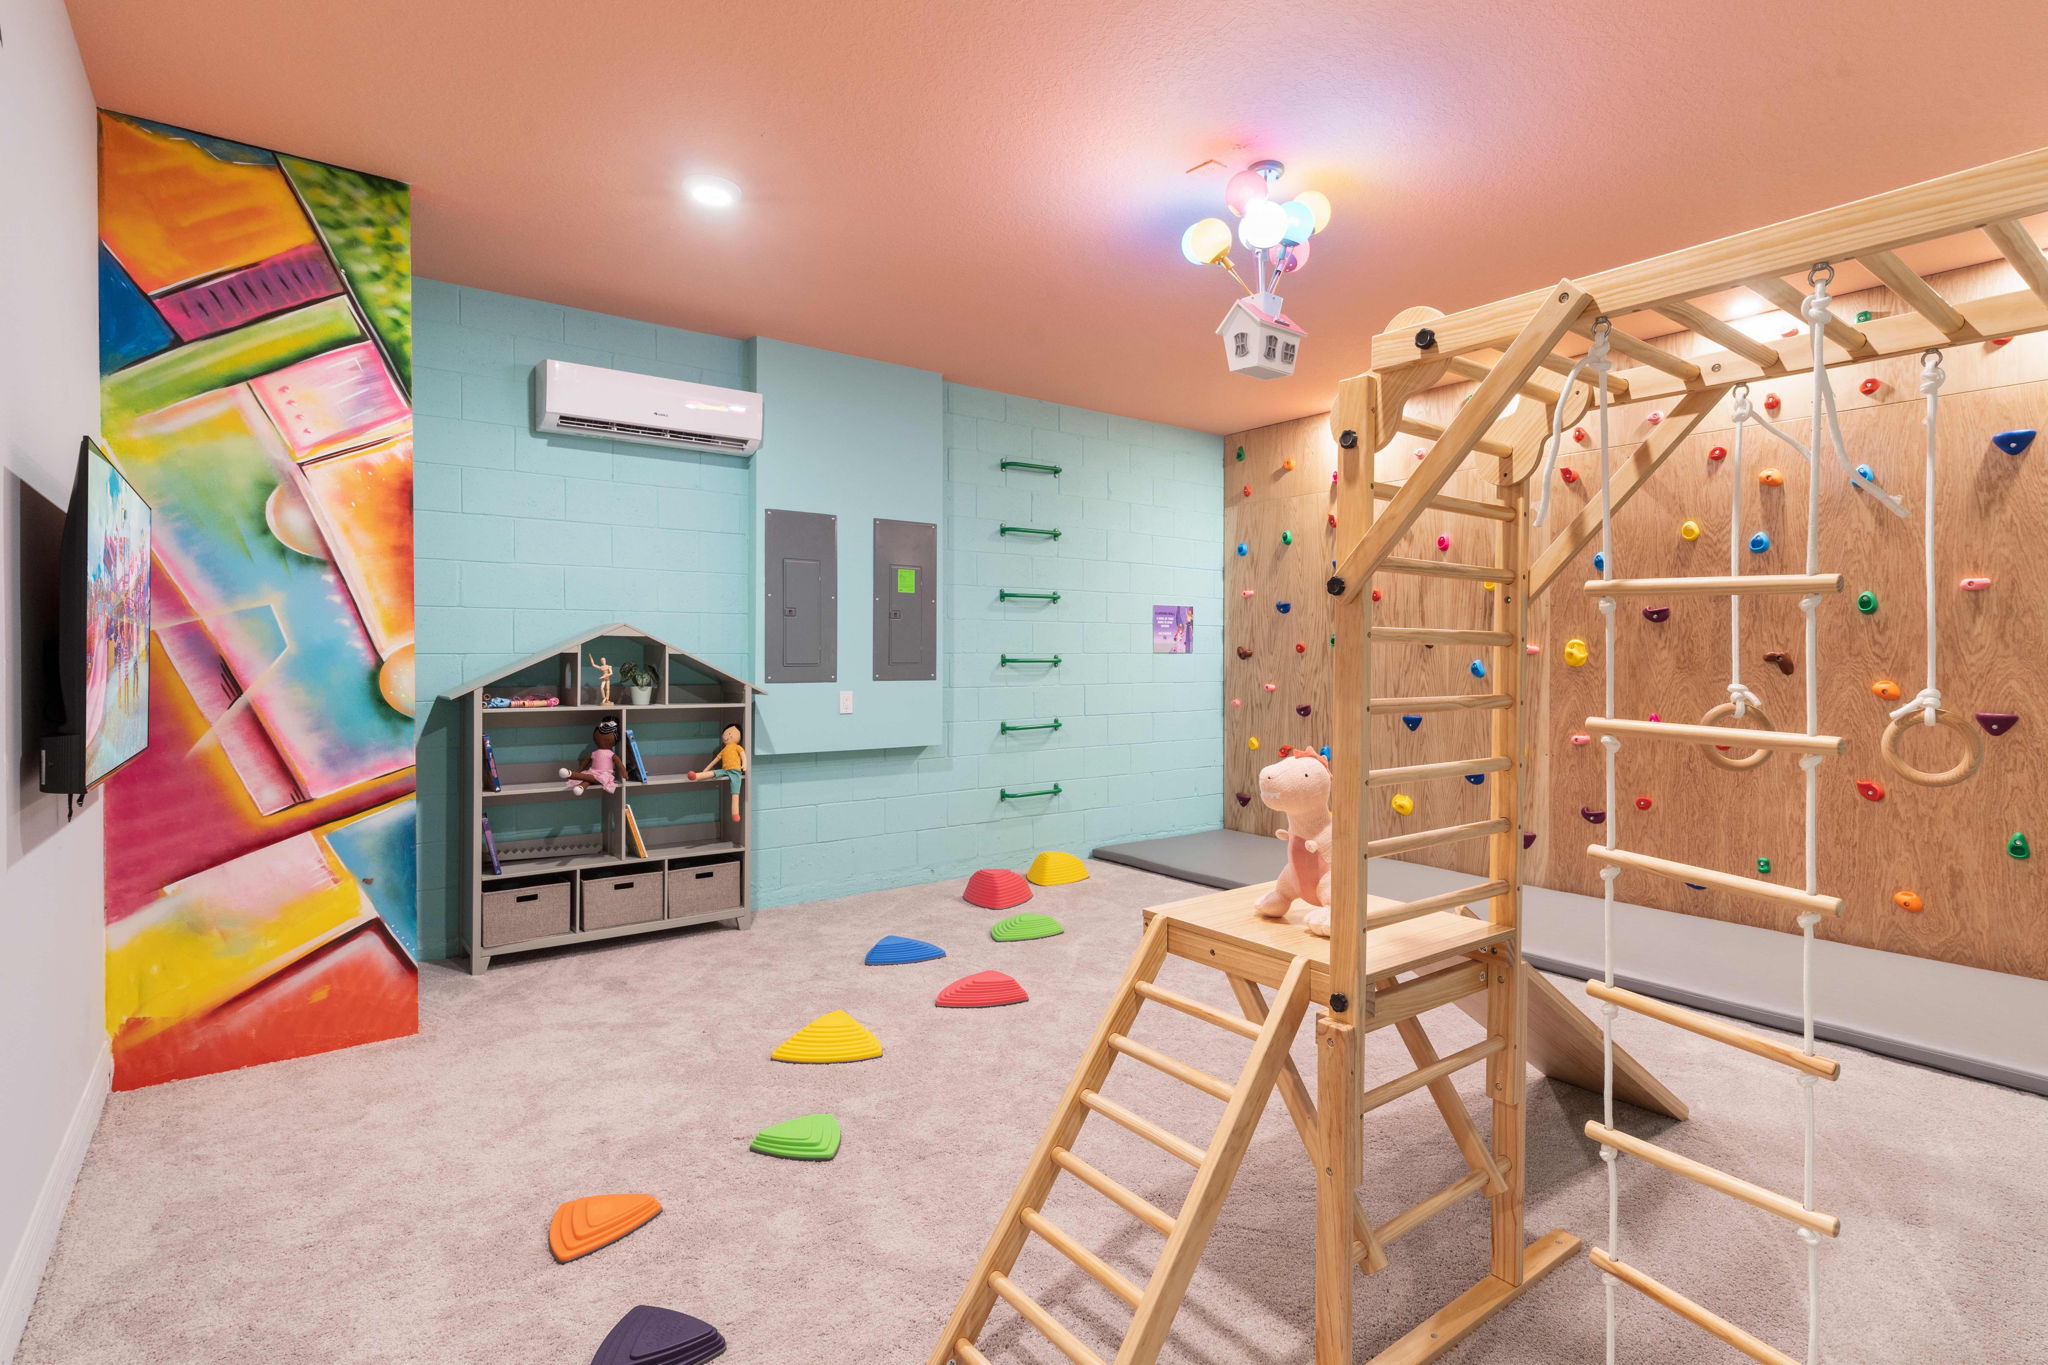 Discover our indoor playroom equipped with an exciting climbing wall, perfect for adventurous children and adults alike. Enjoy hours of active fun in a safe and engaging environment right at home.